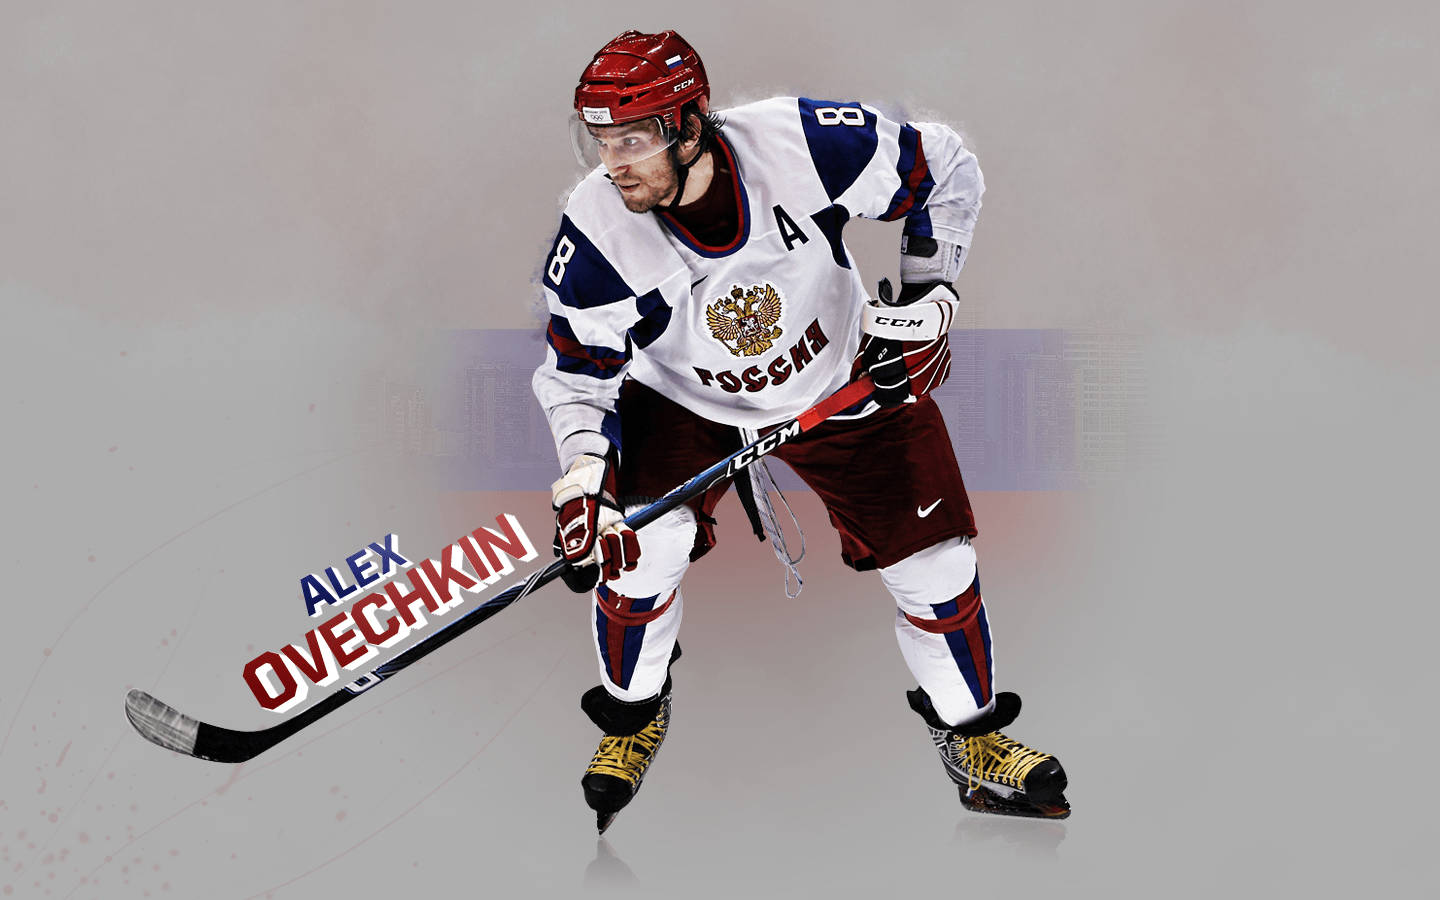 Ice-Hockey Prodigy, Alex Ovechkin in Action on the Rink Wallpaper